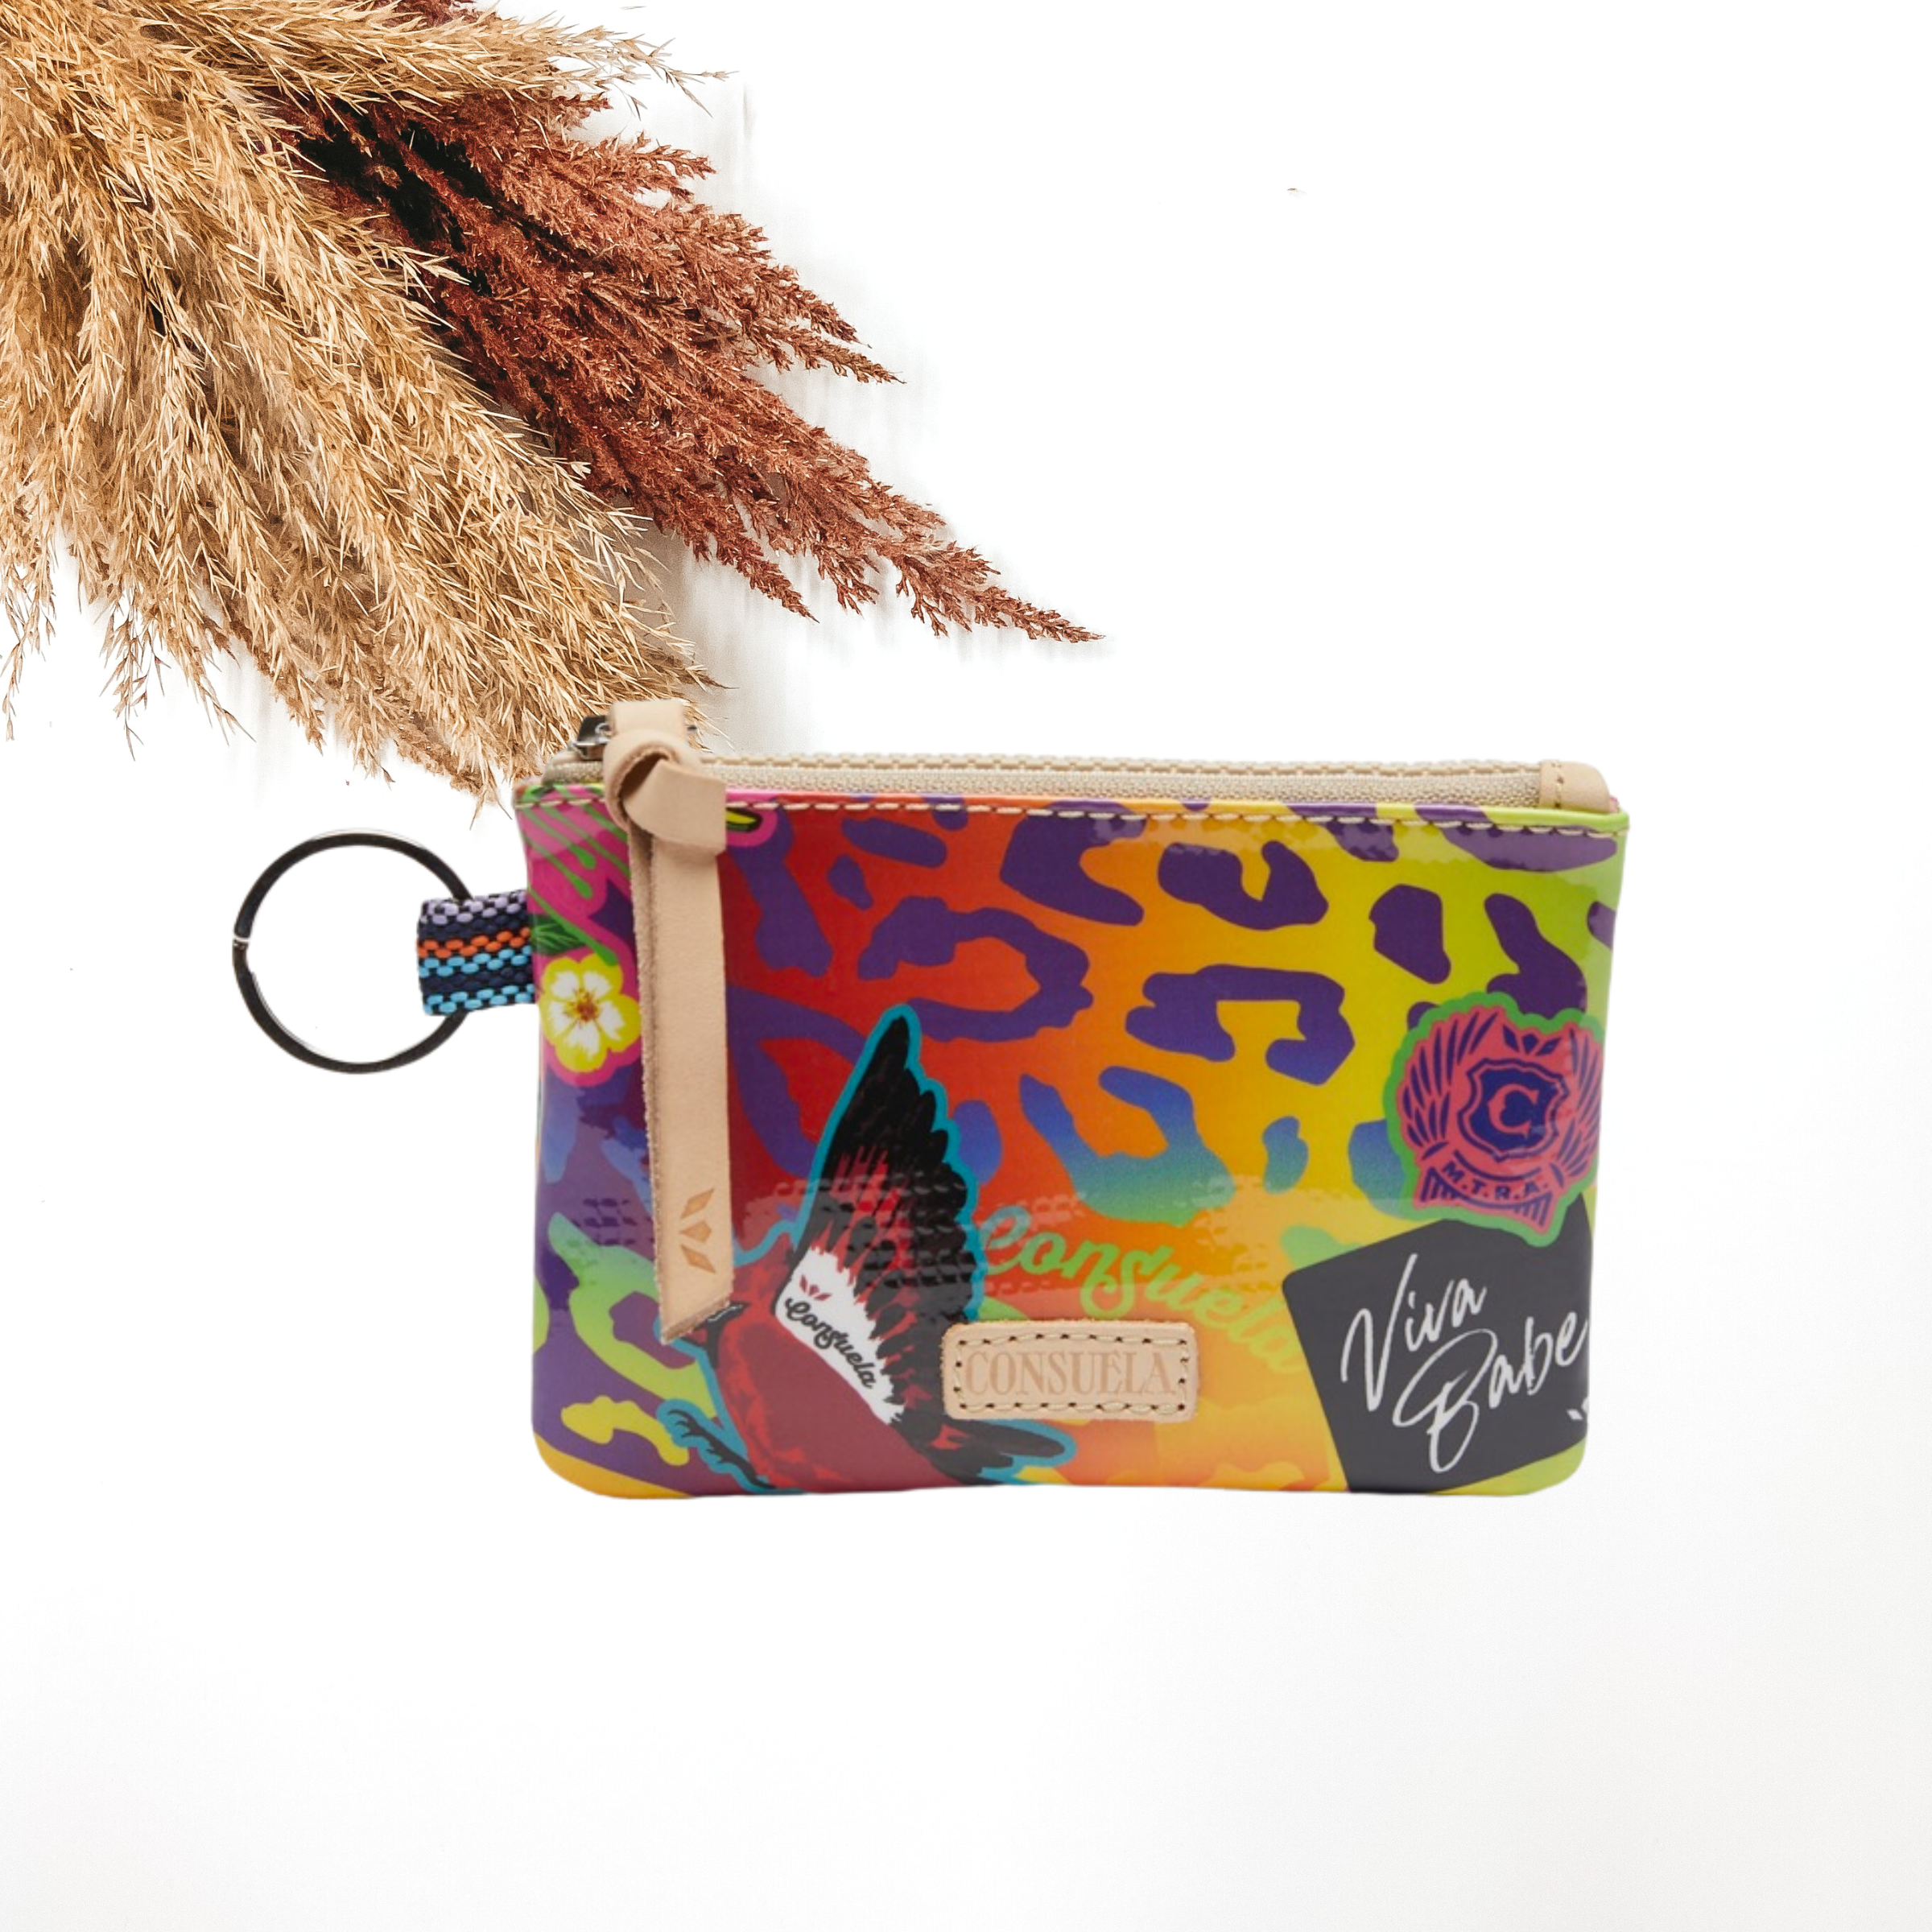 CONSUELA - Keychain Kit Pouch – The Pink Leopard